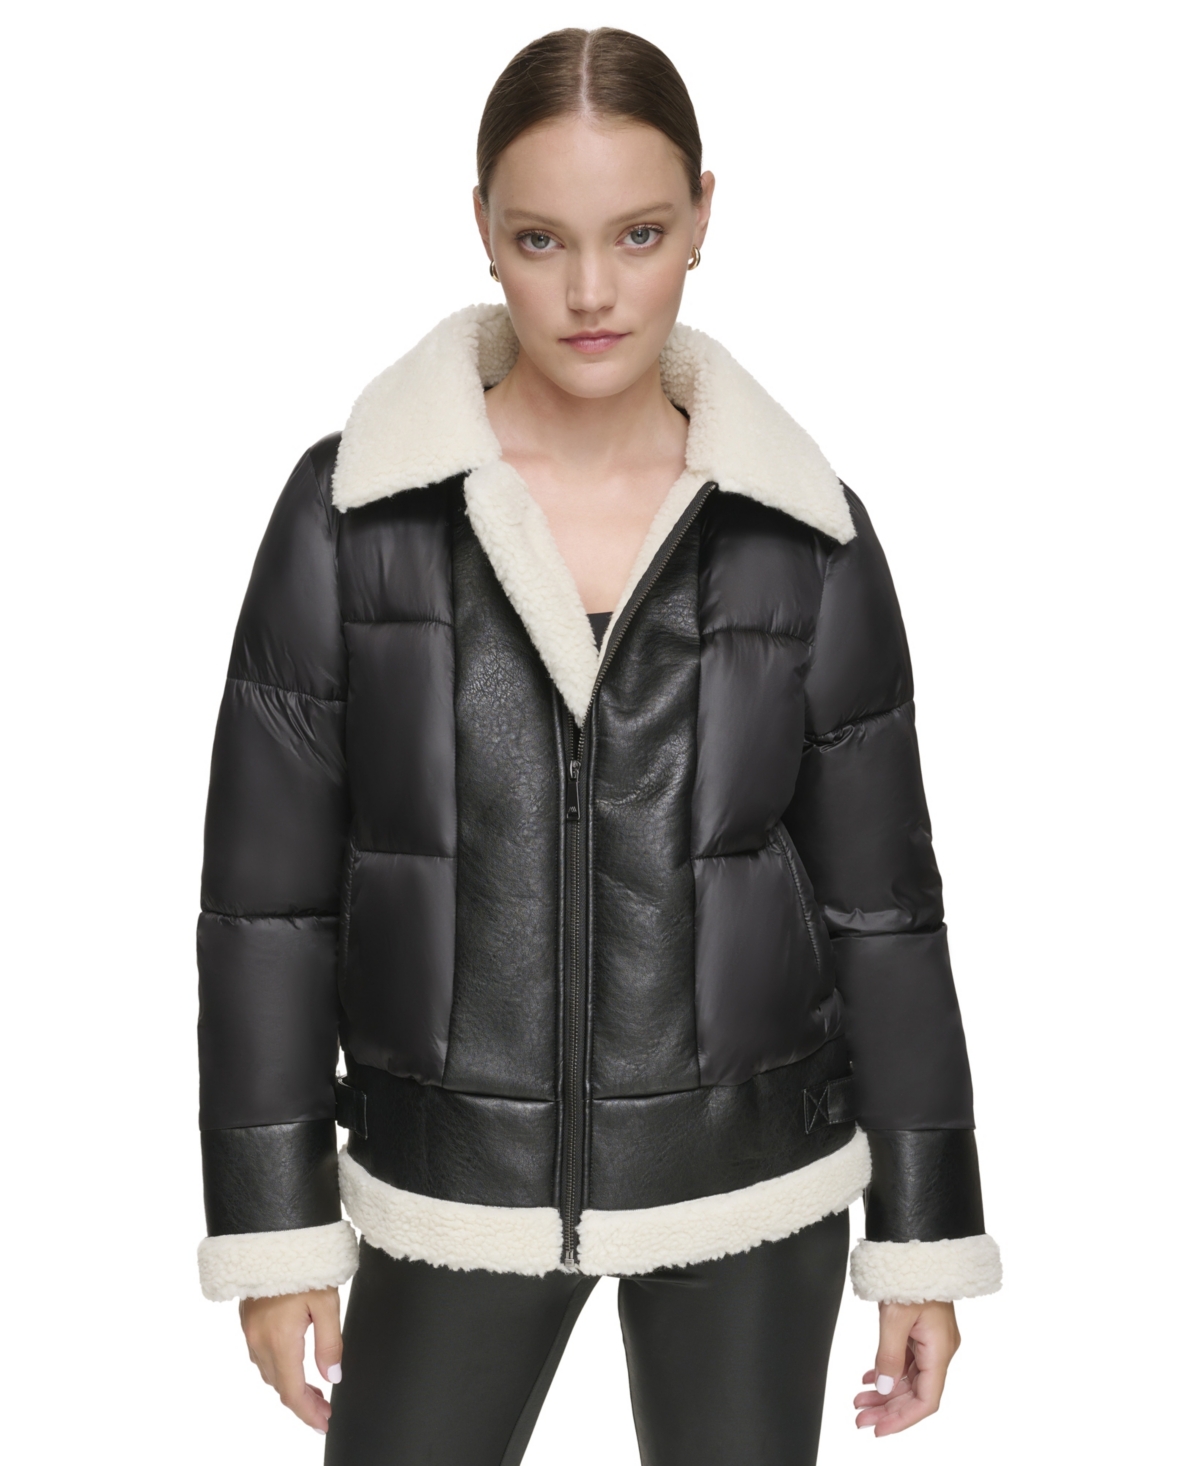 Women's Mixed Puffer Jacket With Faux Leather and Sherpa Trim - Black